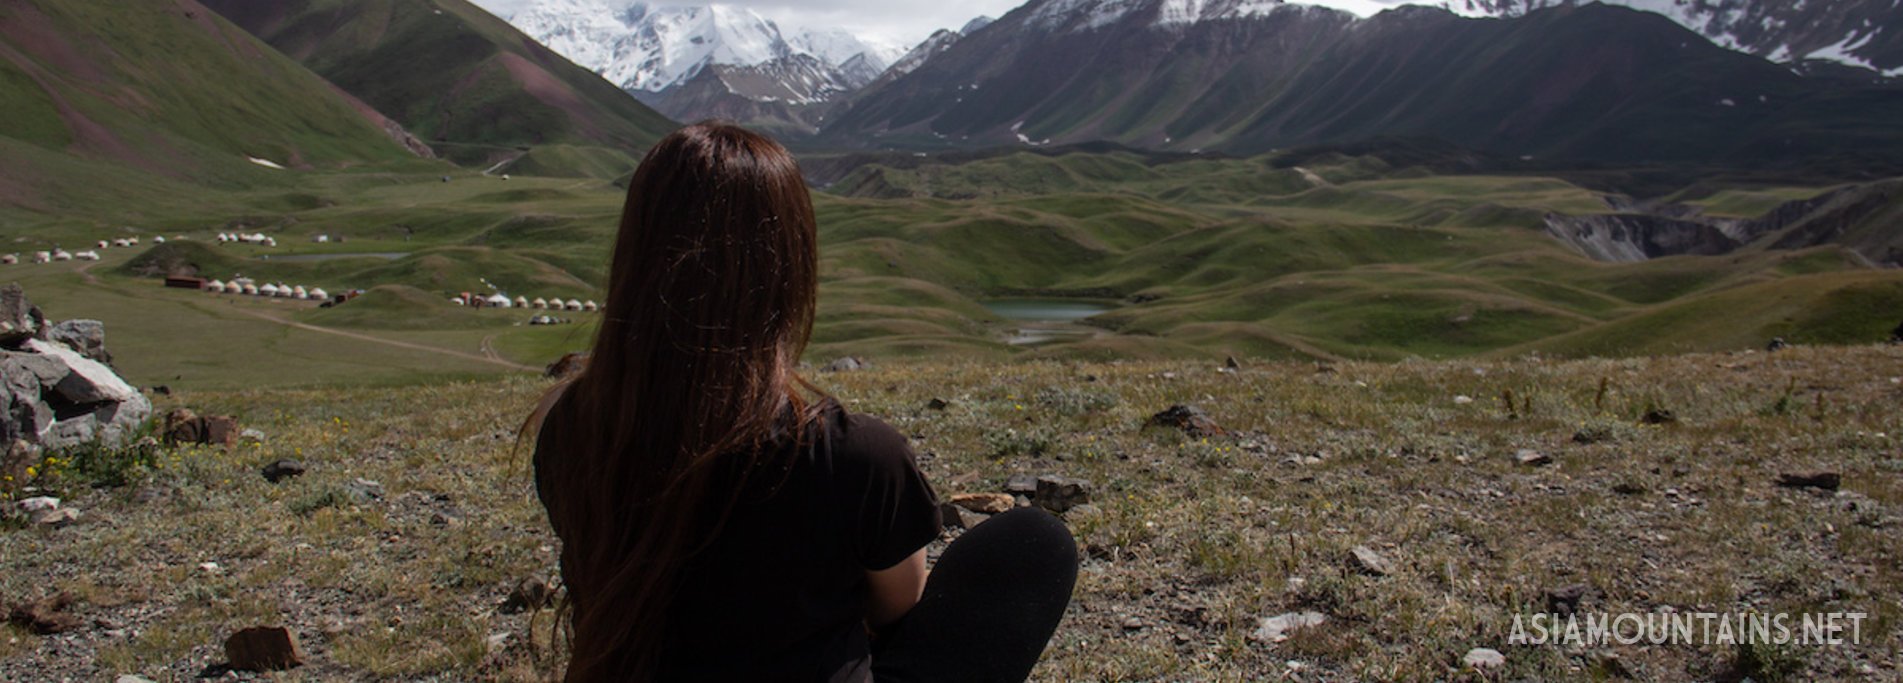 Summer vacation in the mountains of Kyrgyzstan